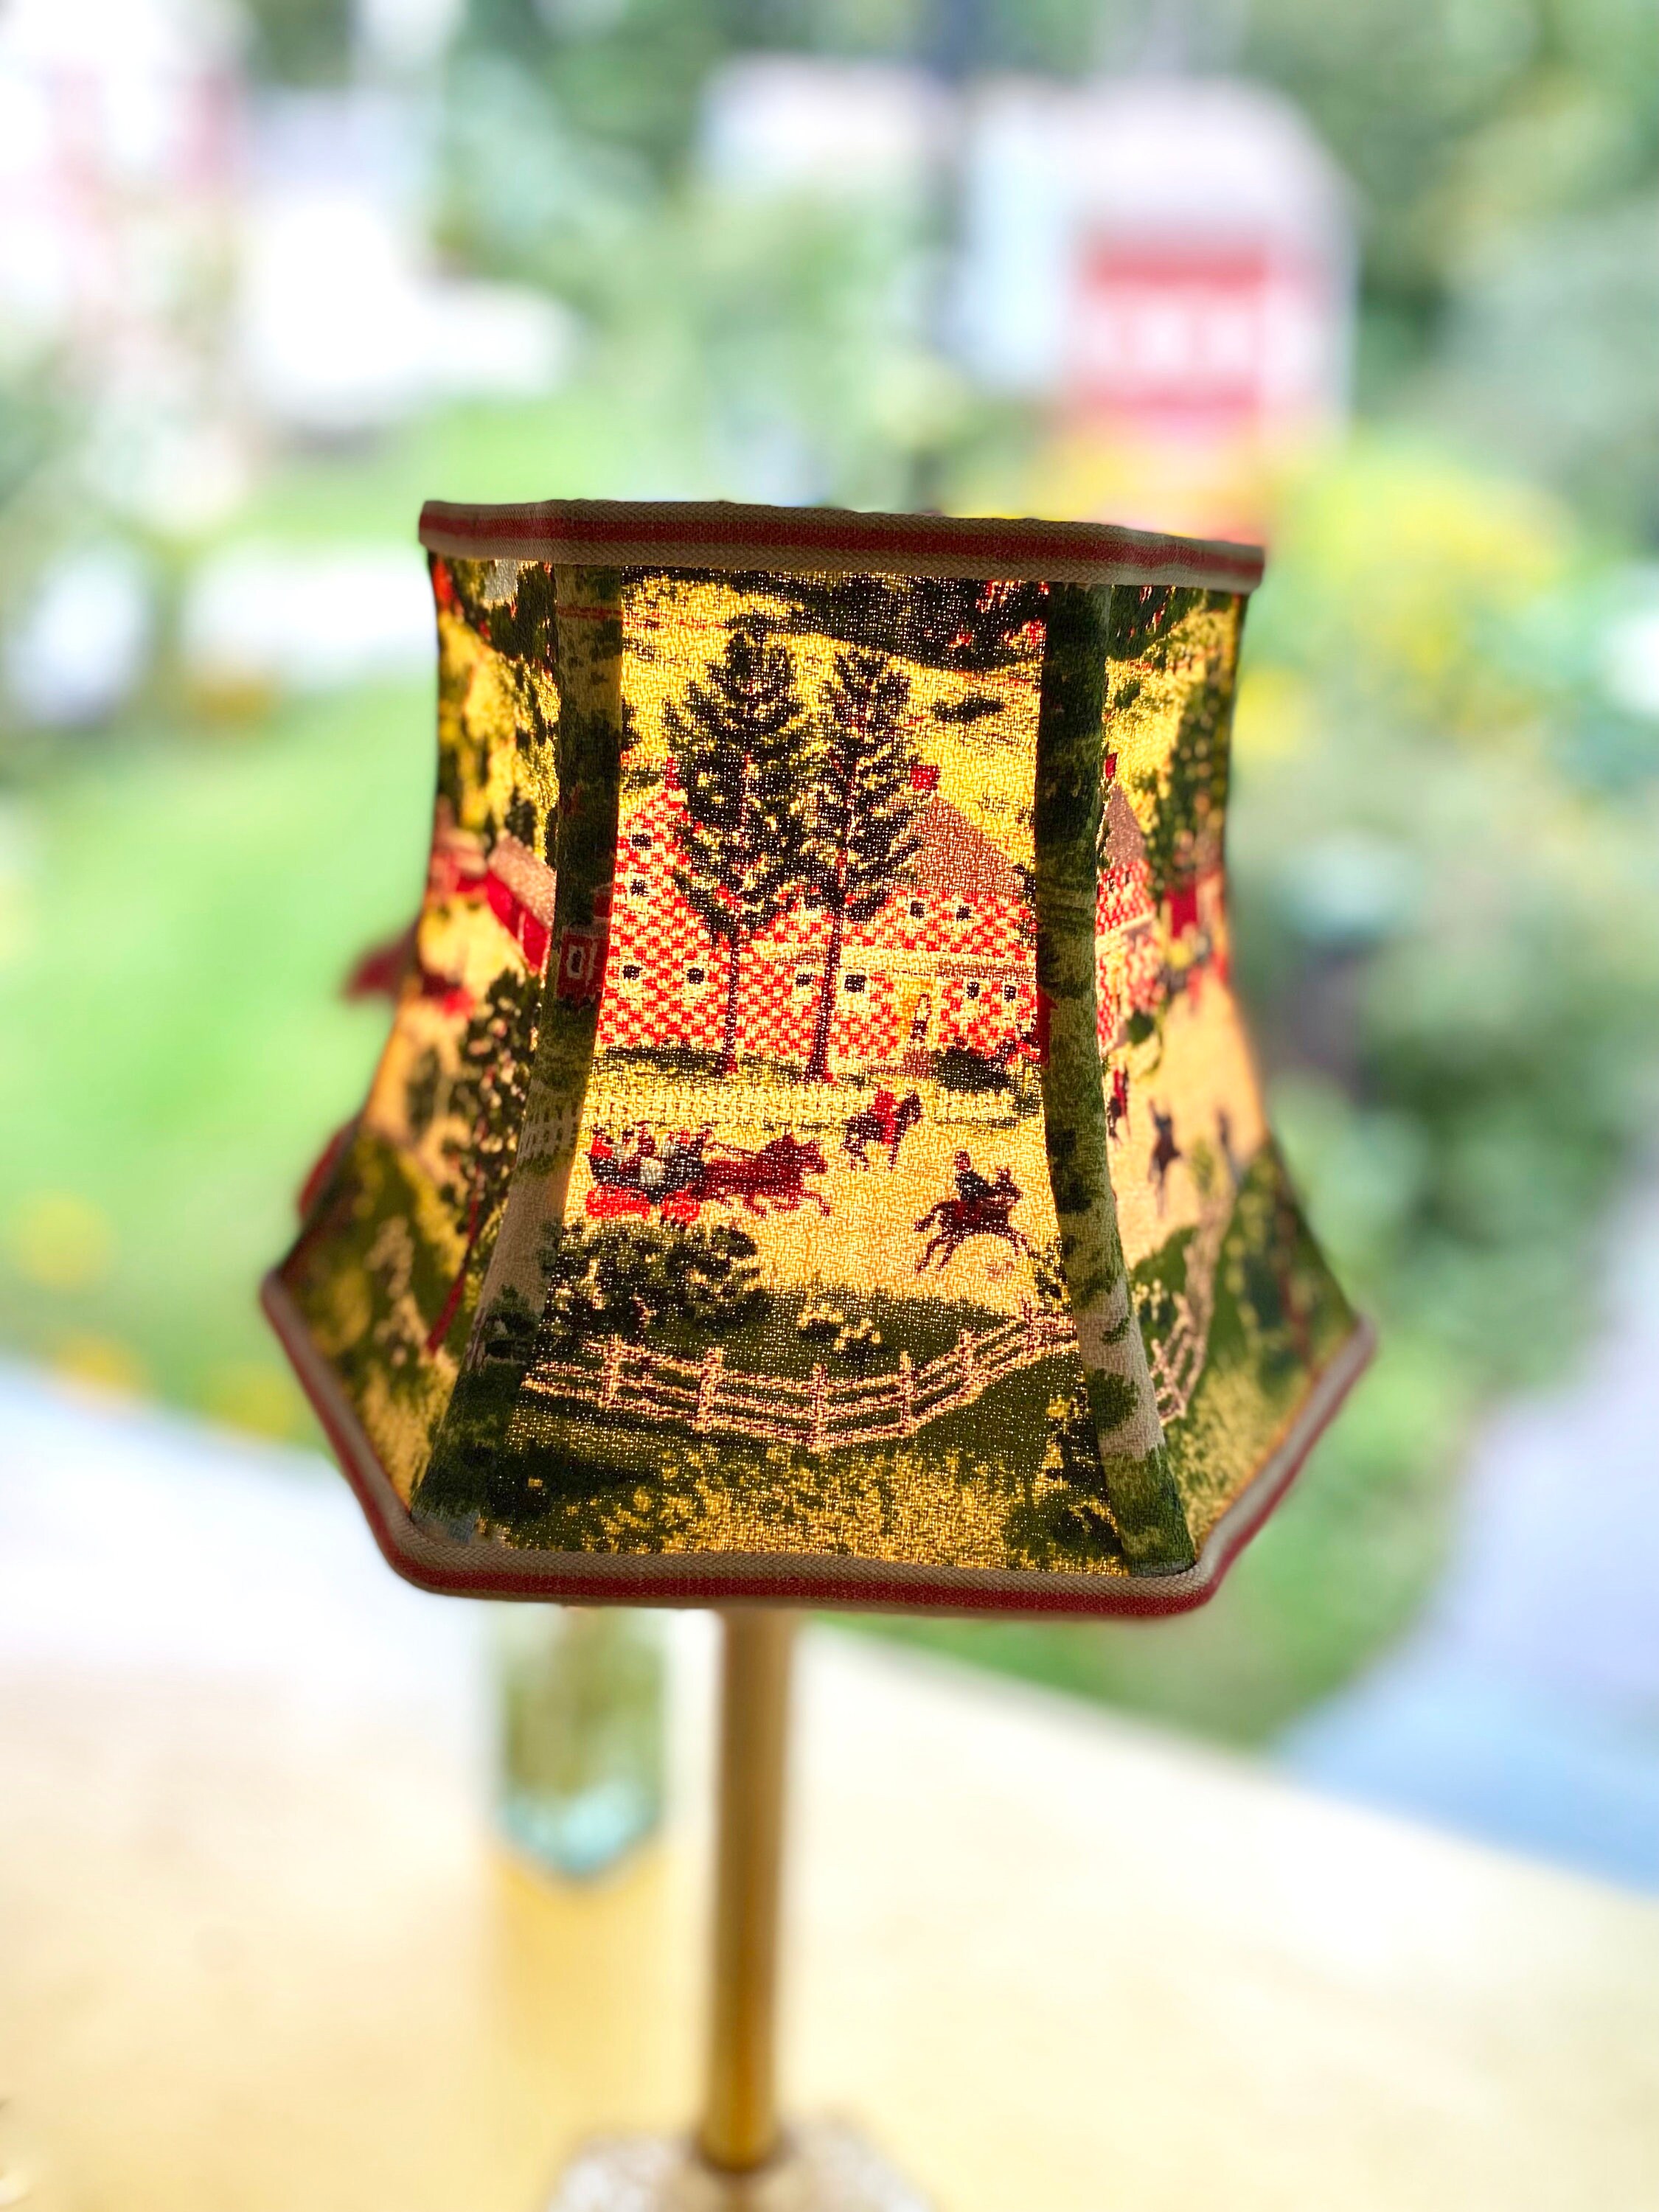 Winter Scene and Springtime Mix of Checkerboard House Hex Clip Grandma Moses Lampshade Vintage Bark Cloth